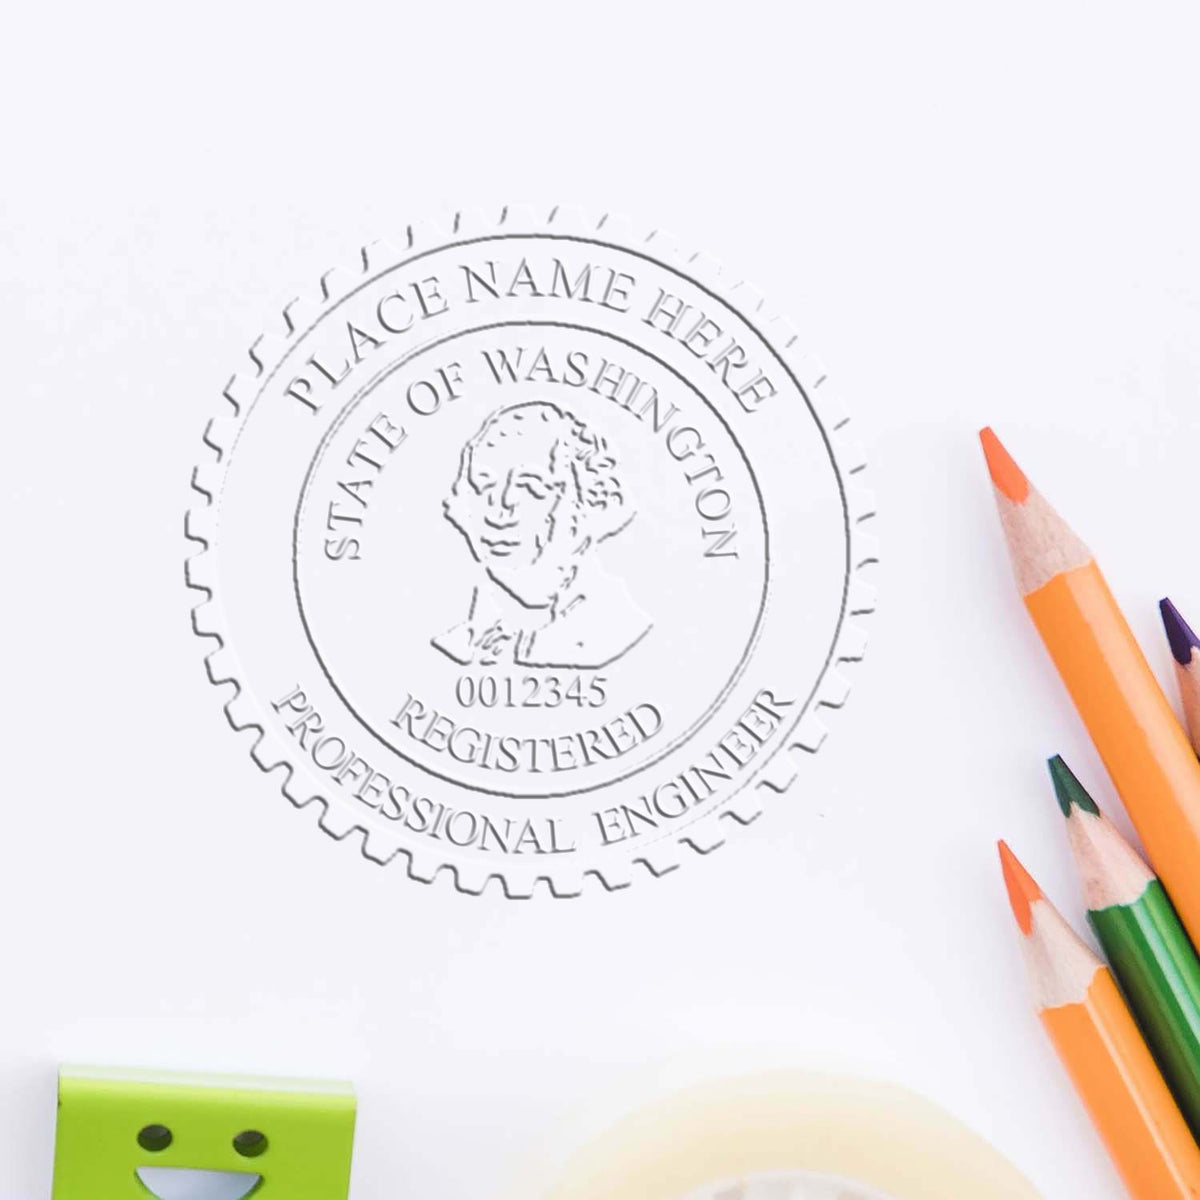 A stamped impression of the Soft Washington Professional Engineer Seal in this stylish lifestyle photo, setting the tone for a unique and personalized product.